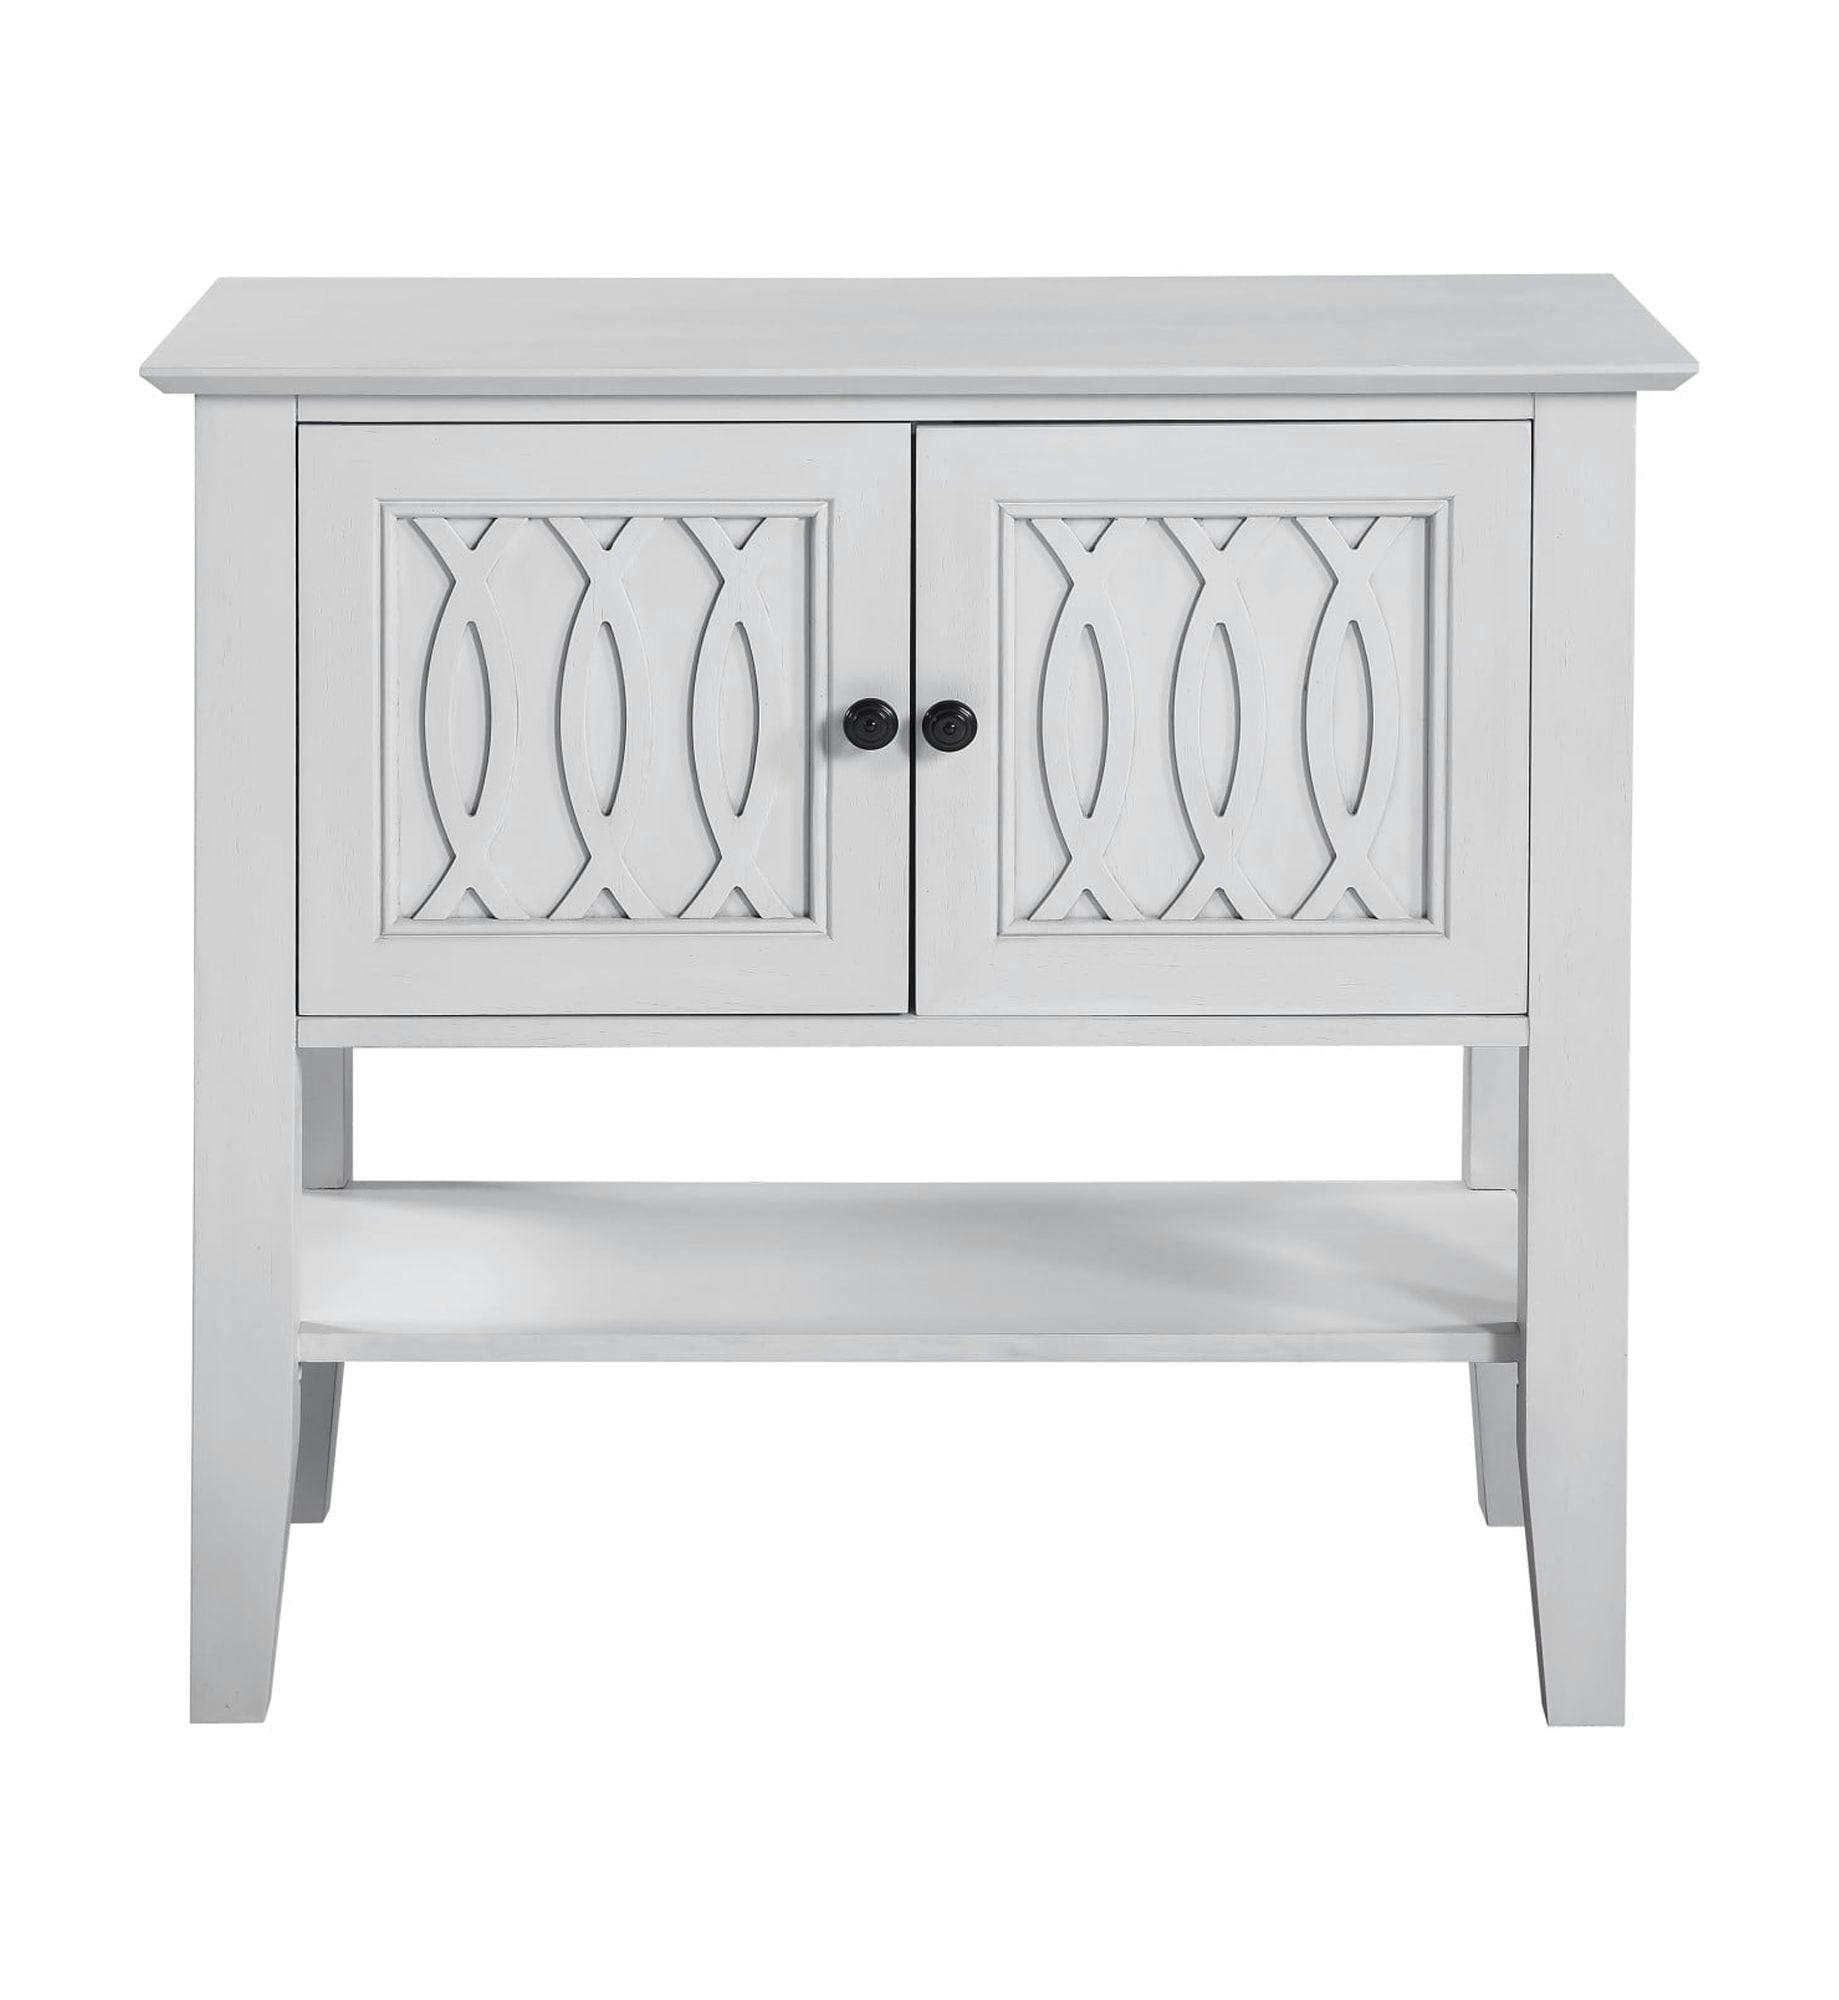 Naples Transitional White Wood Server with Overlapping Ring Design